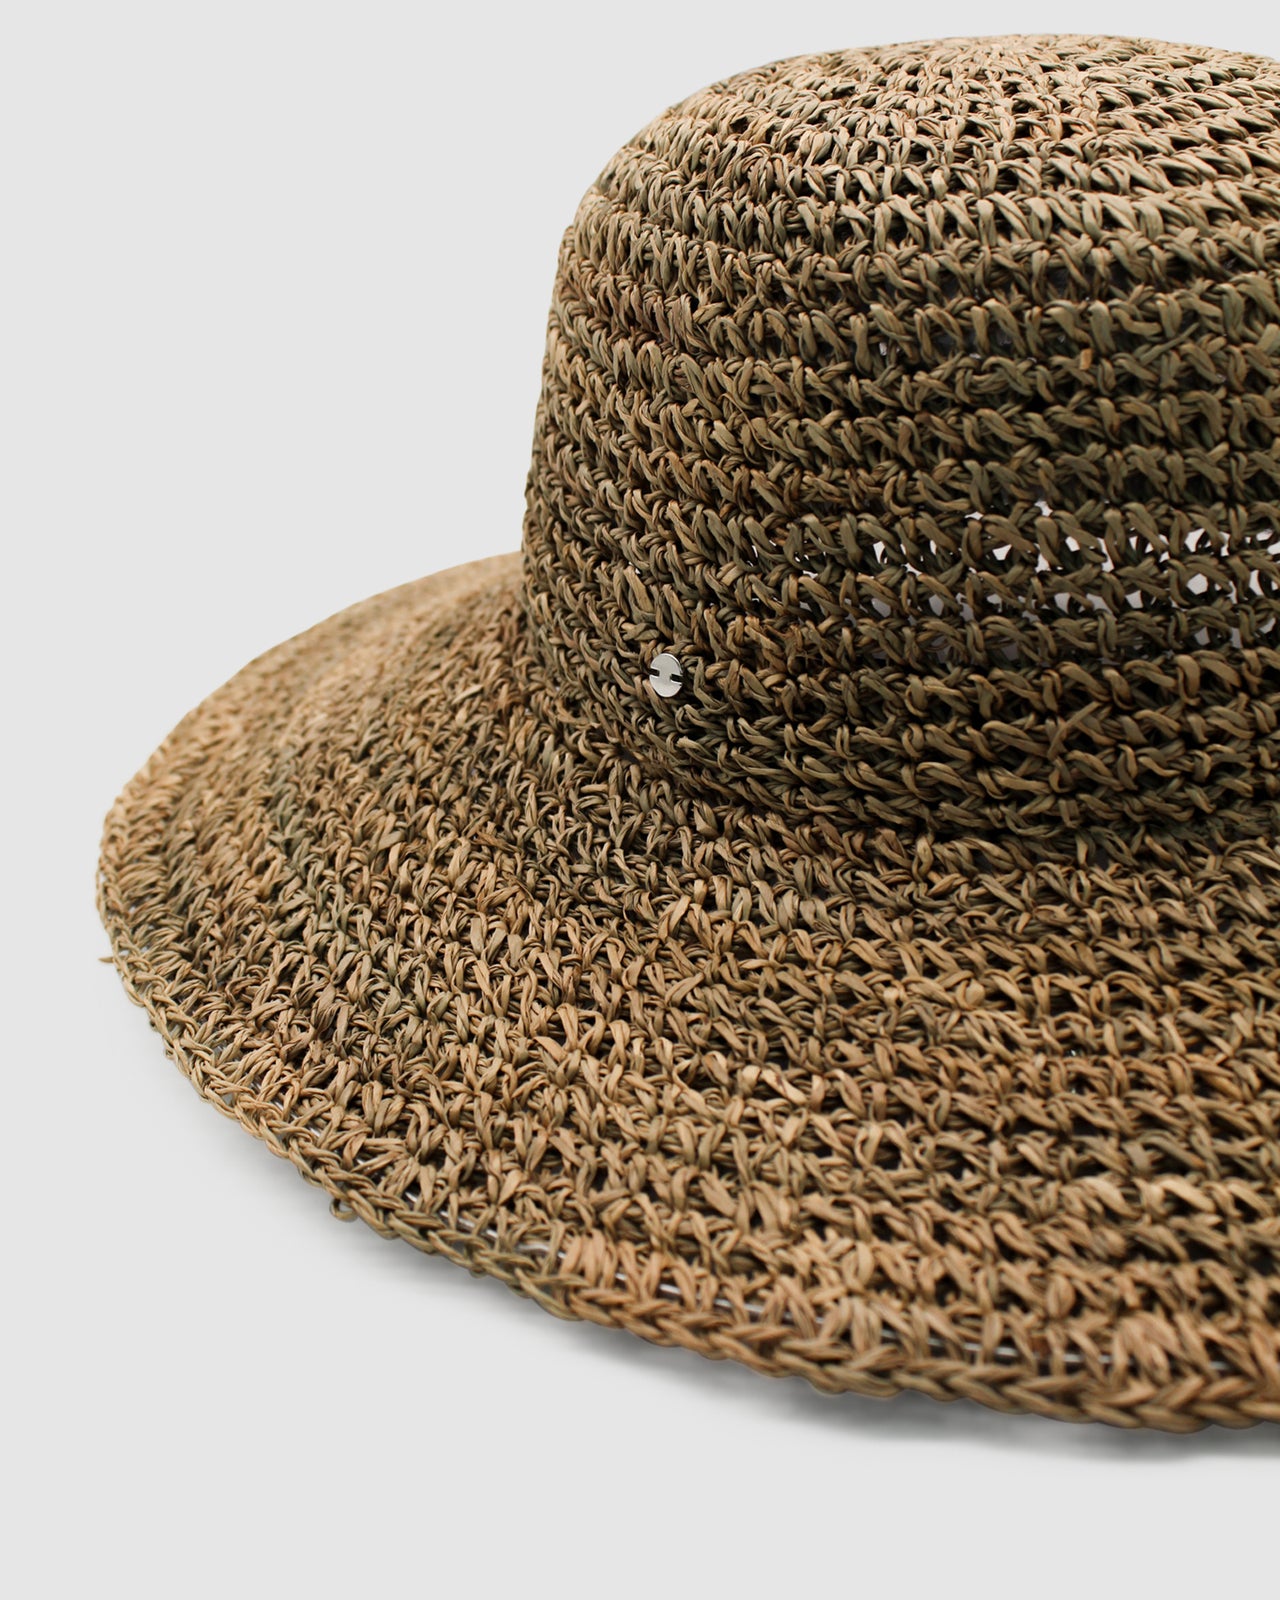 Ace of Something Cue Fedora | Seagrass